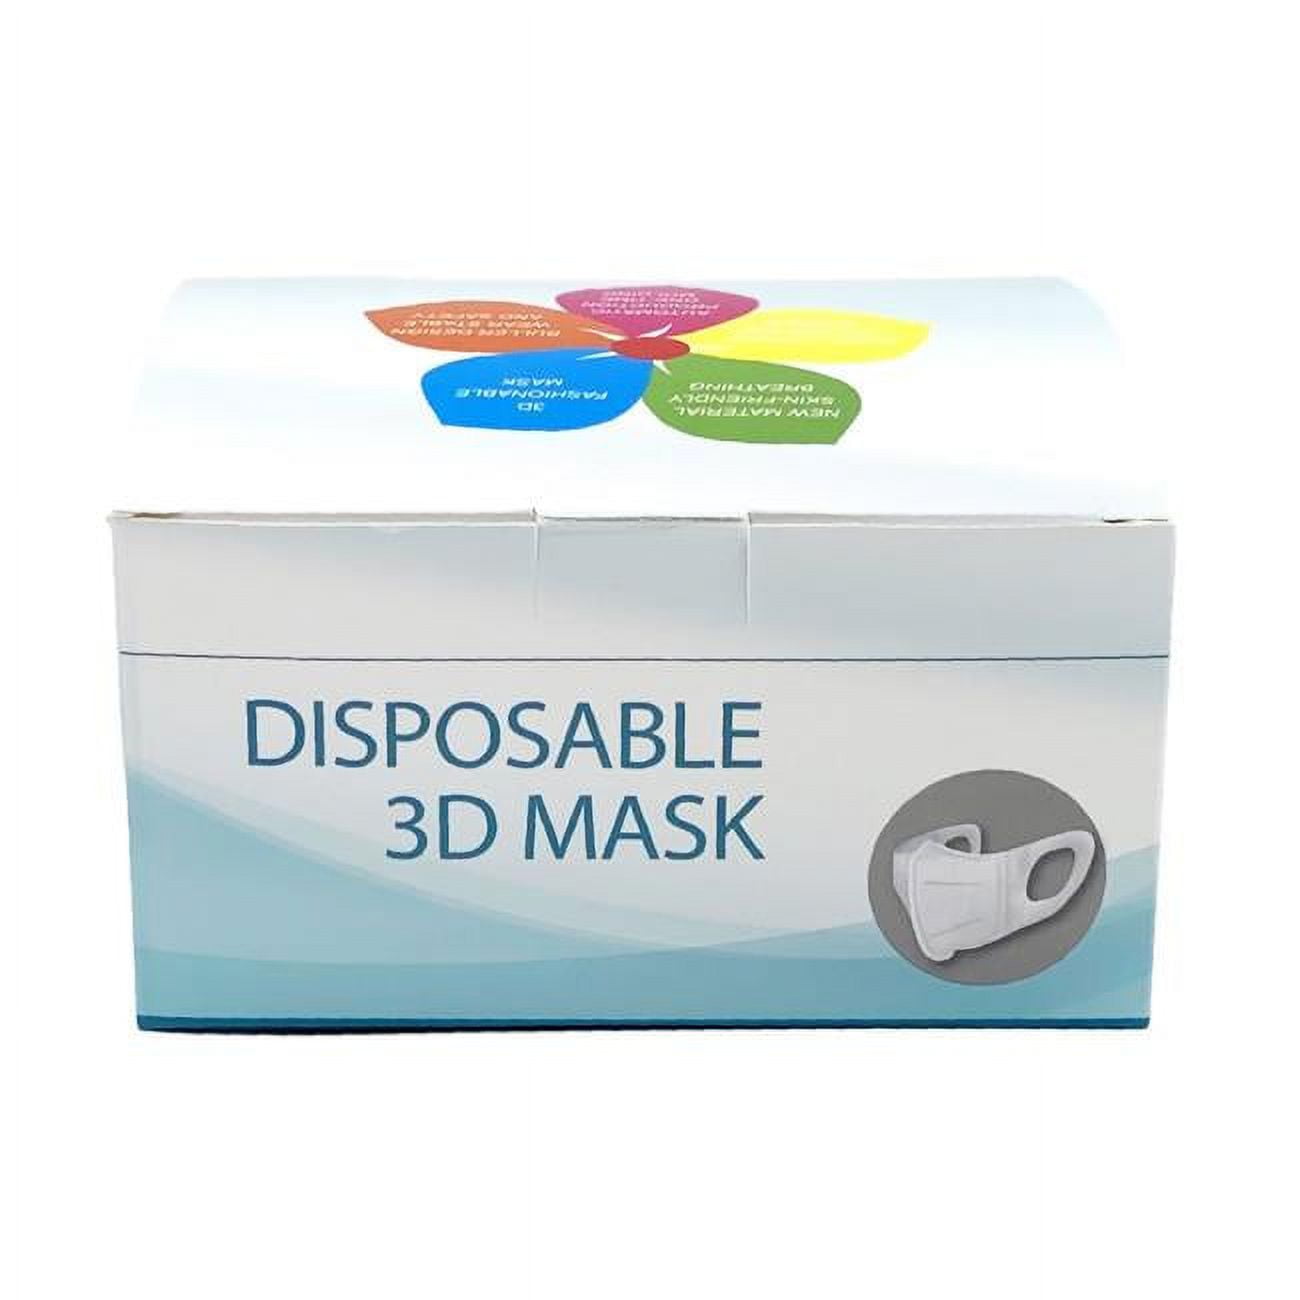 Picture of DDI 2348560 Non-Medical 3D-DiMen&apos;sional Mask Case of 100